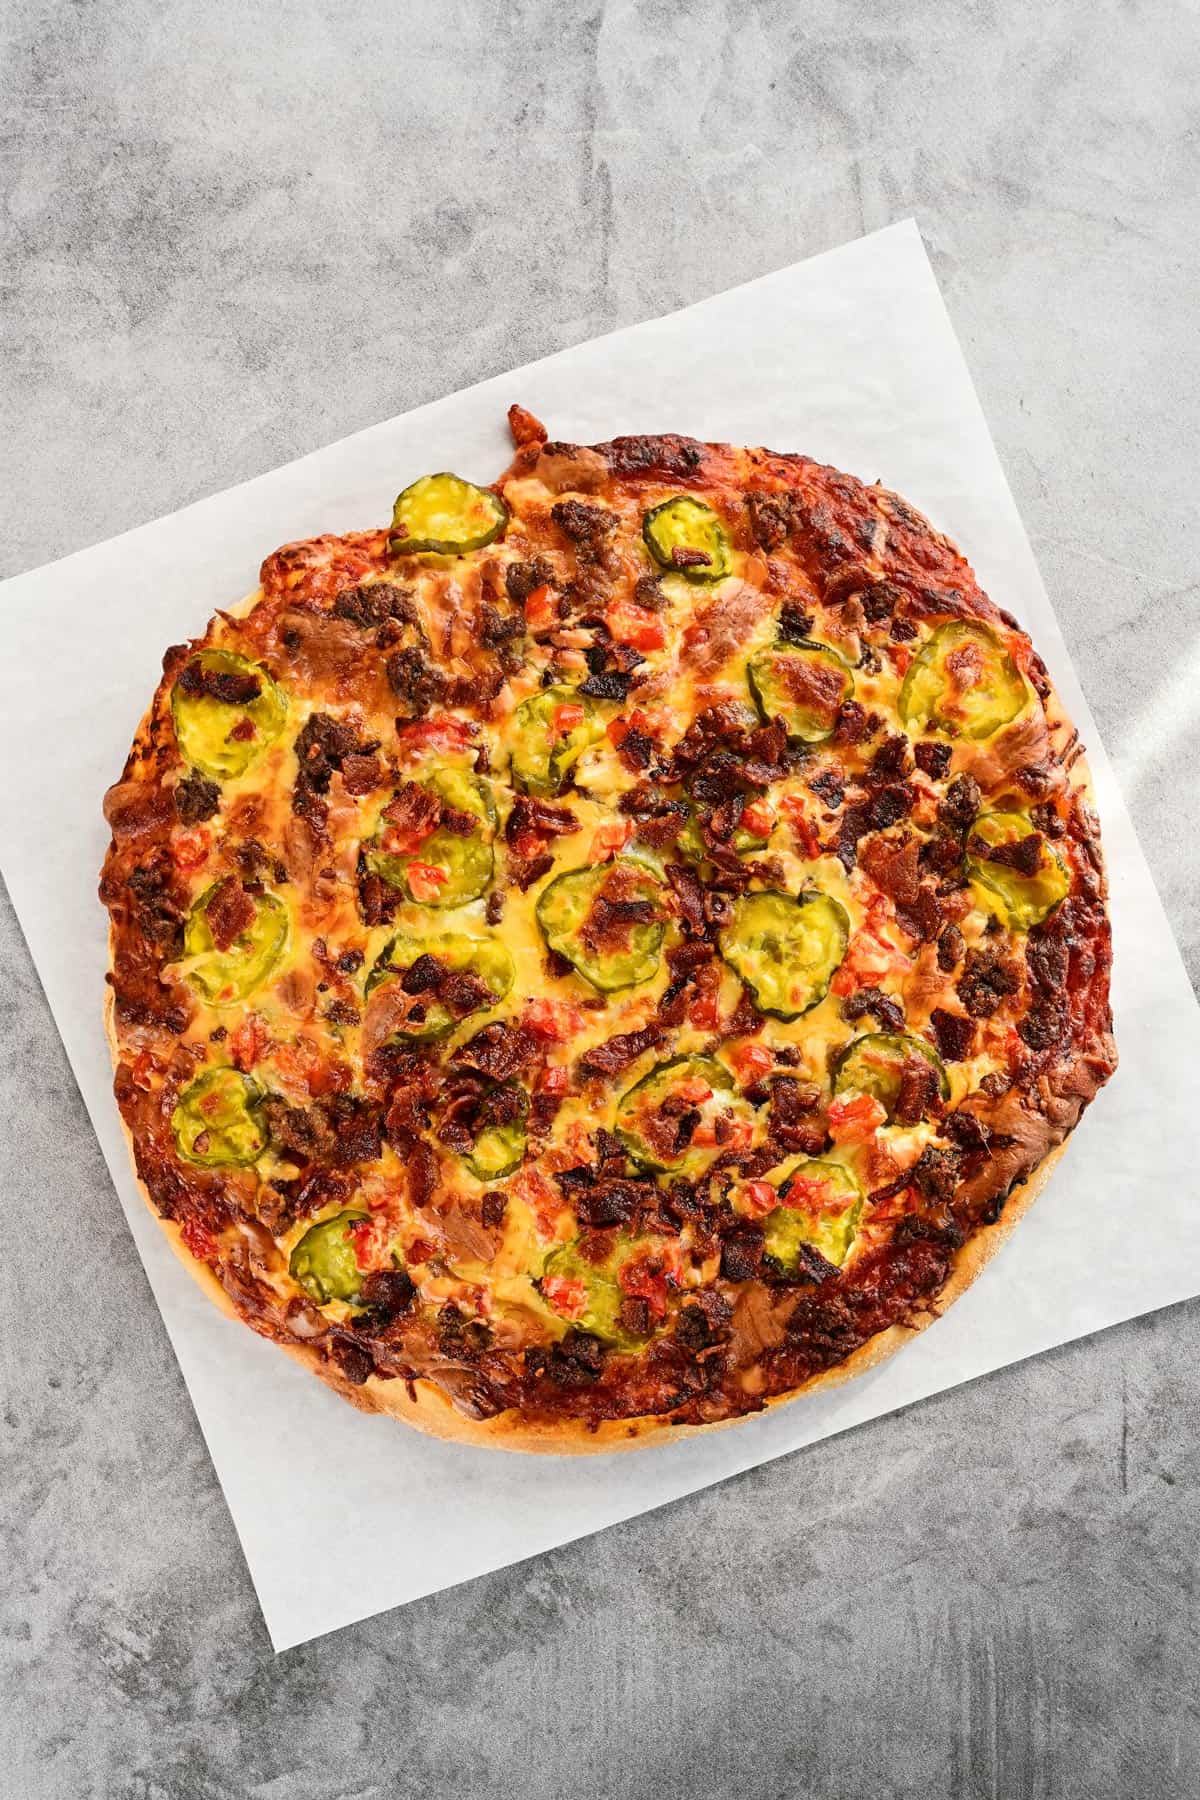 A cooked cheeseburger pizza.